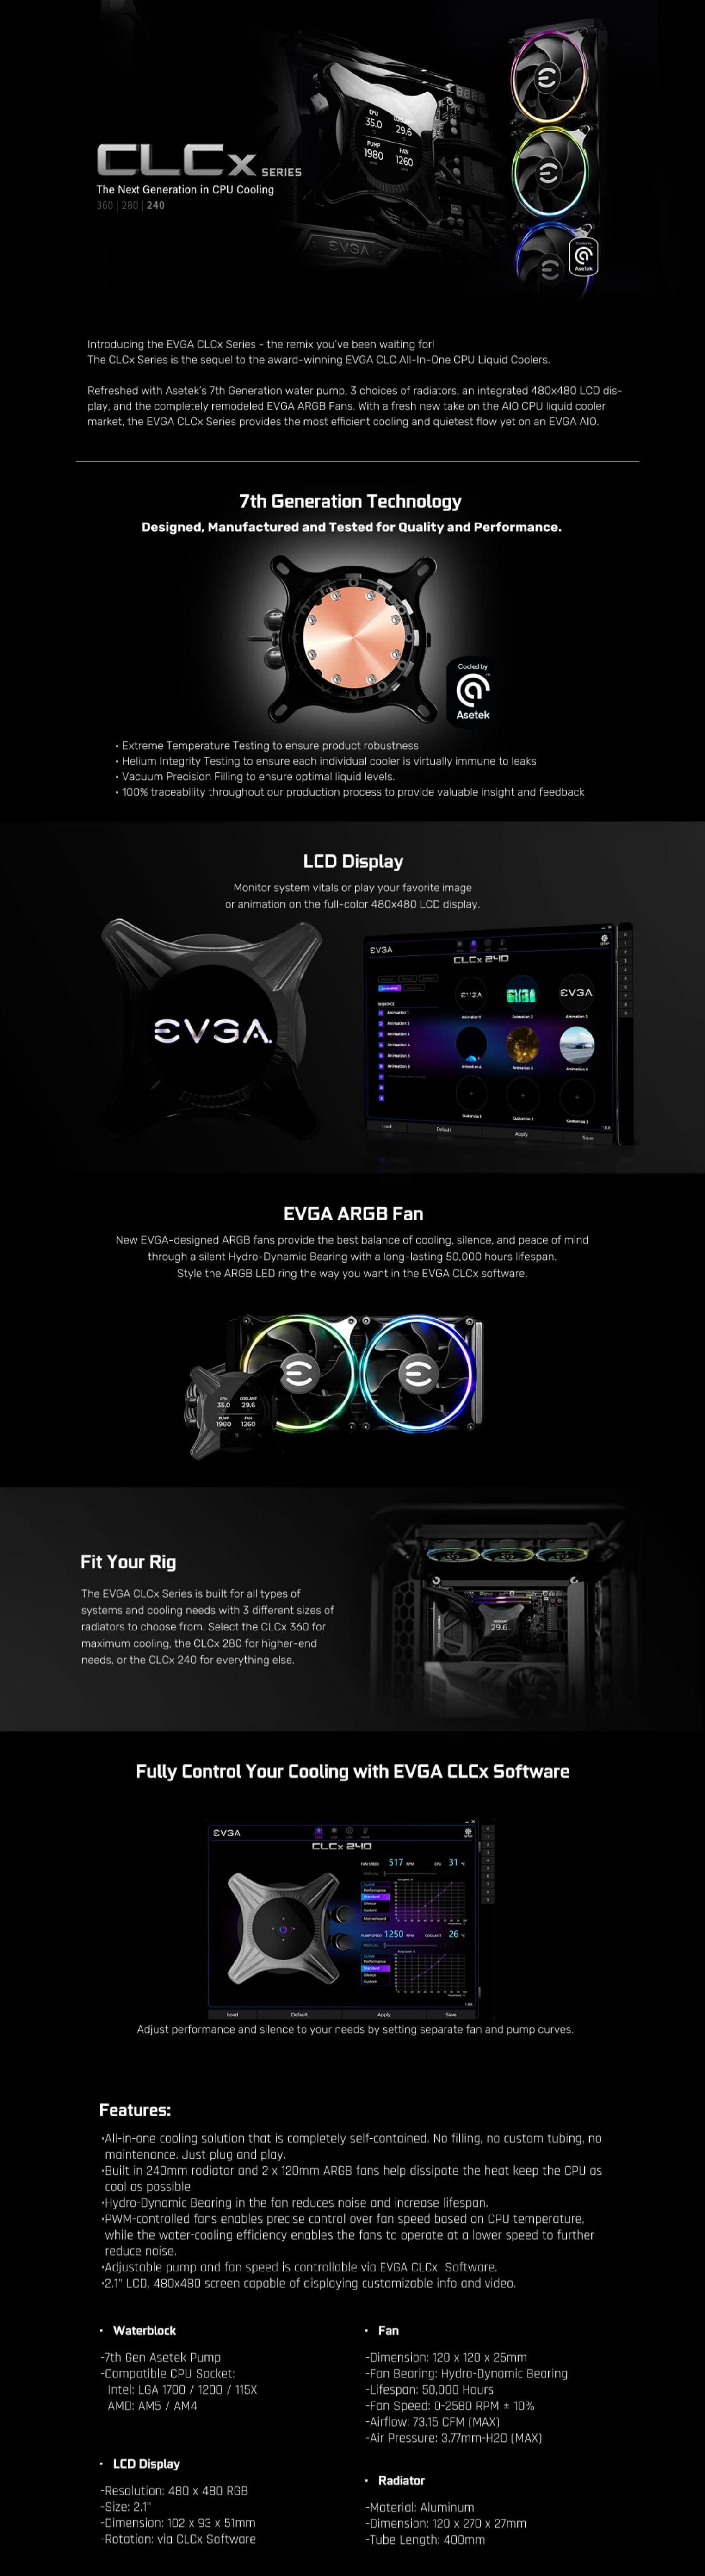 A large marketing image providing additional information about the product EVGA CLCx 240mm AIO LCD Liquid CPU Cooler - Additional alt info not provided